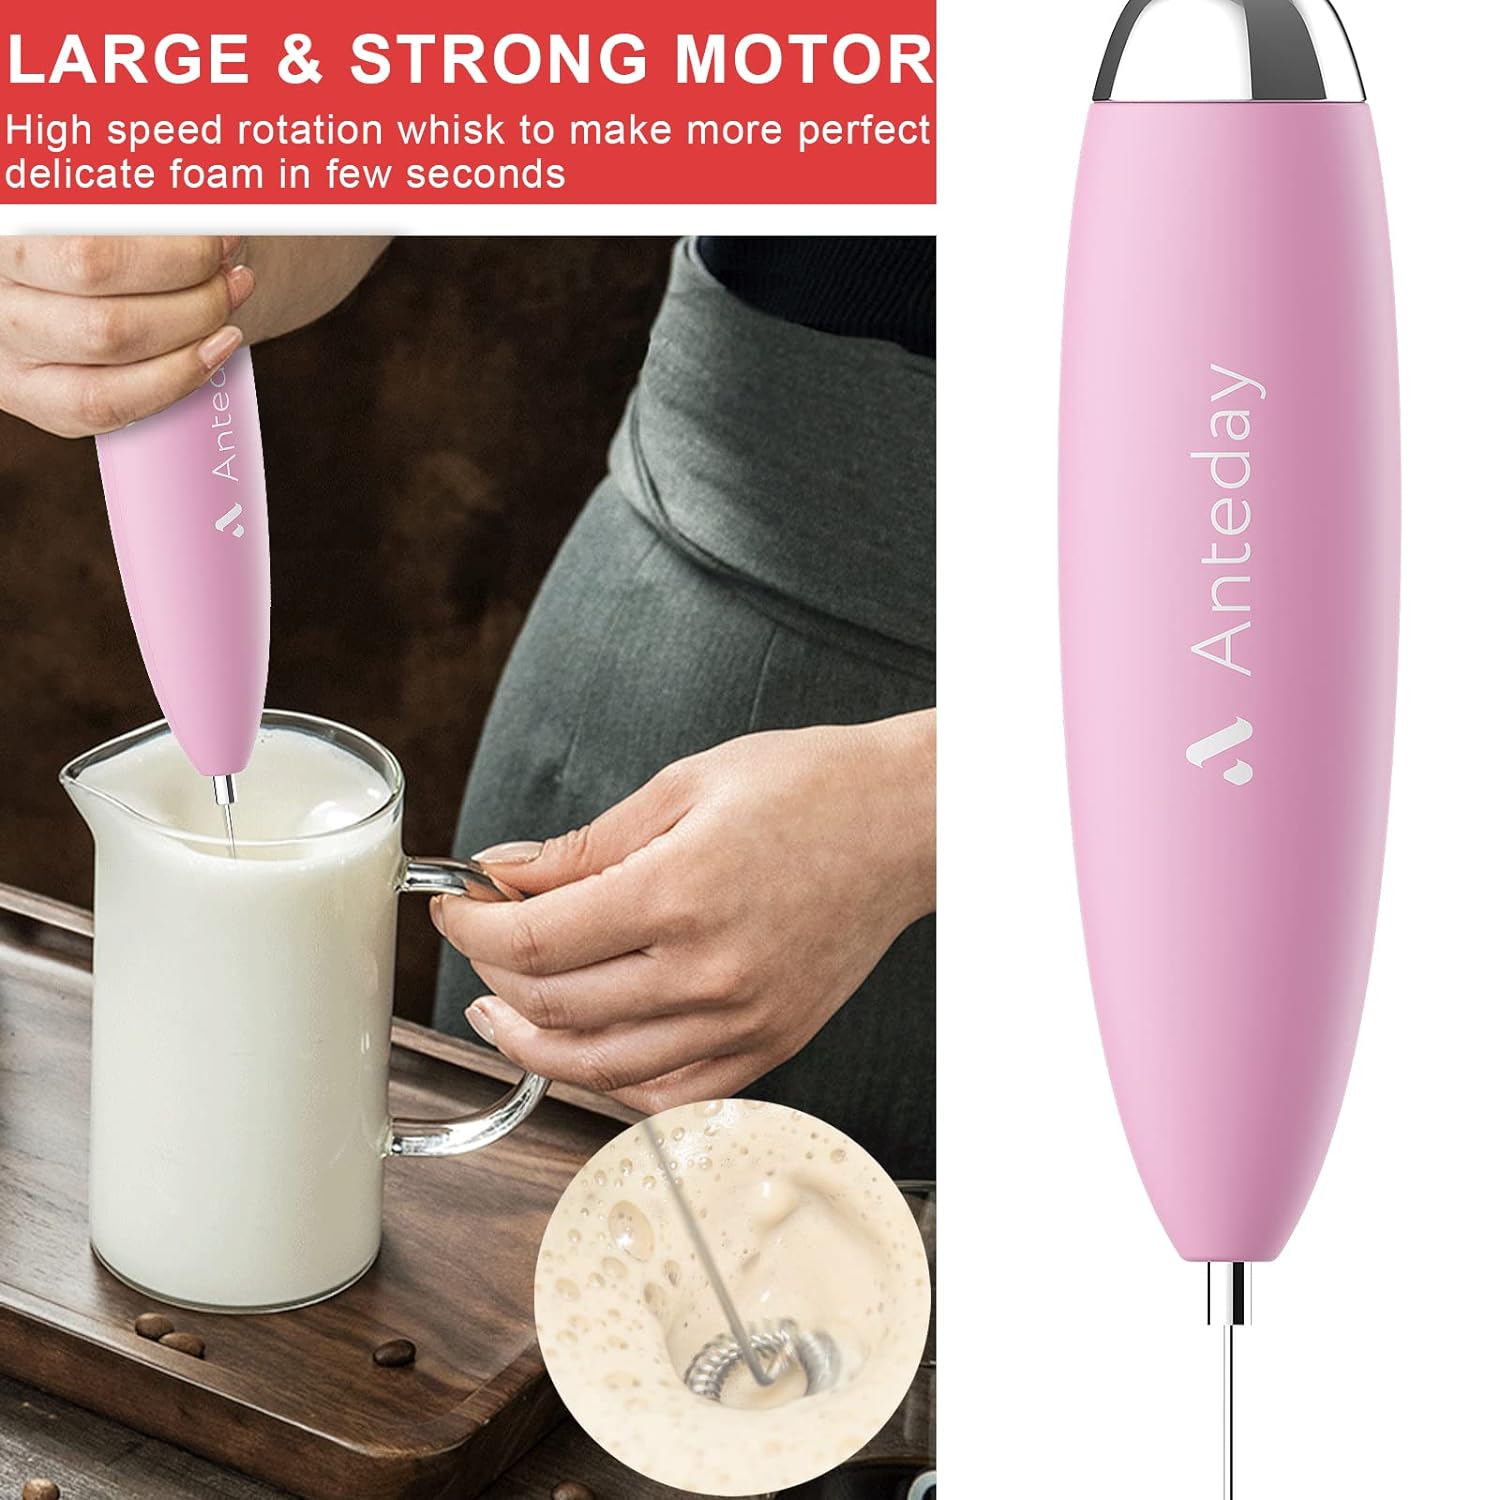 Frother for Coffee, Frother Handheld, Milk Frother, Upgraded Matcha Whisk Drink Mixer Electric Mini Whisk Hand Frother Mini Foamer Coffee Mixer for Lattes Cappuccino Frappe Matcha Hot Chocolate, Pink